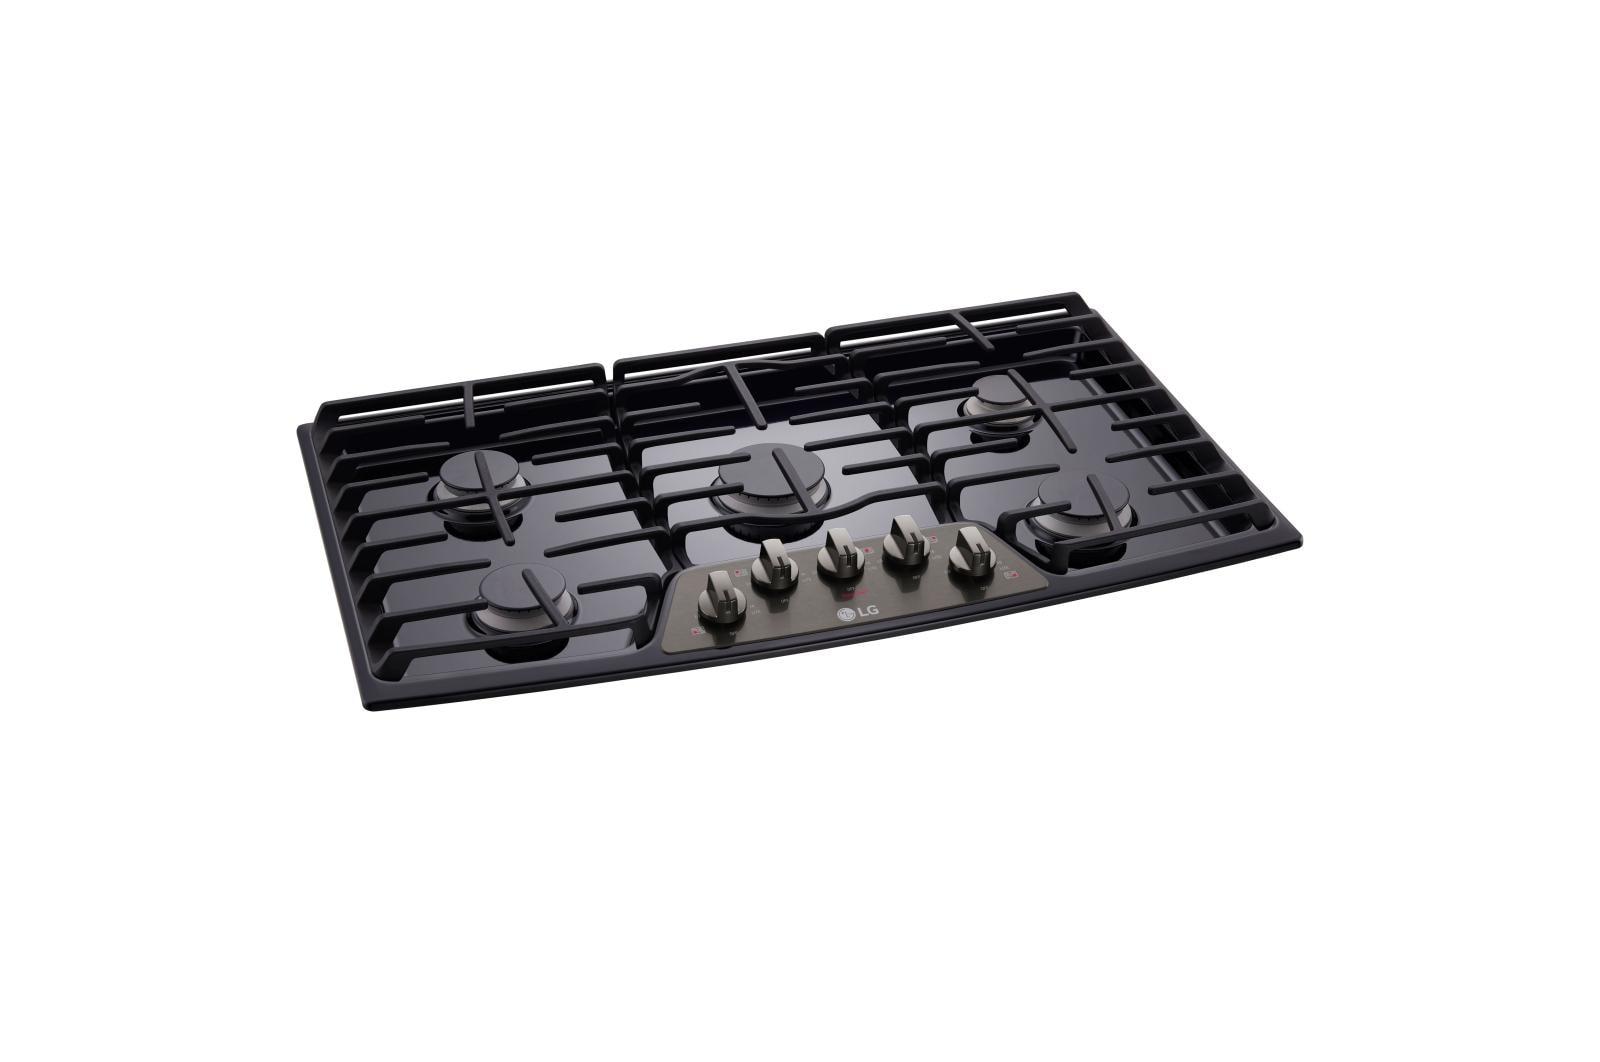 36'' Gas Cooktop with SuperBoil™